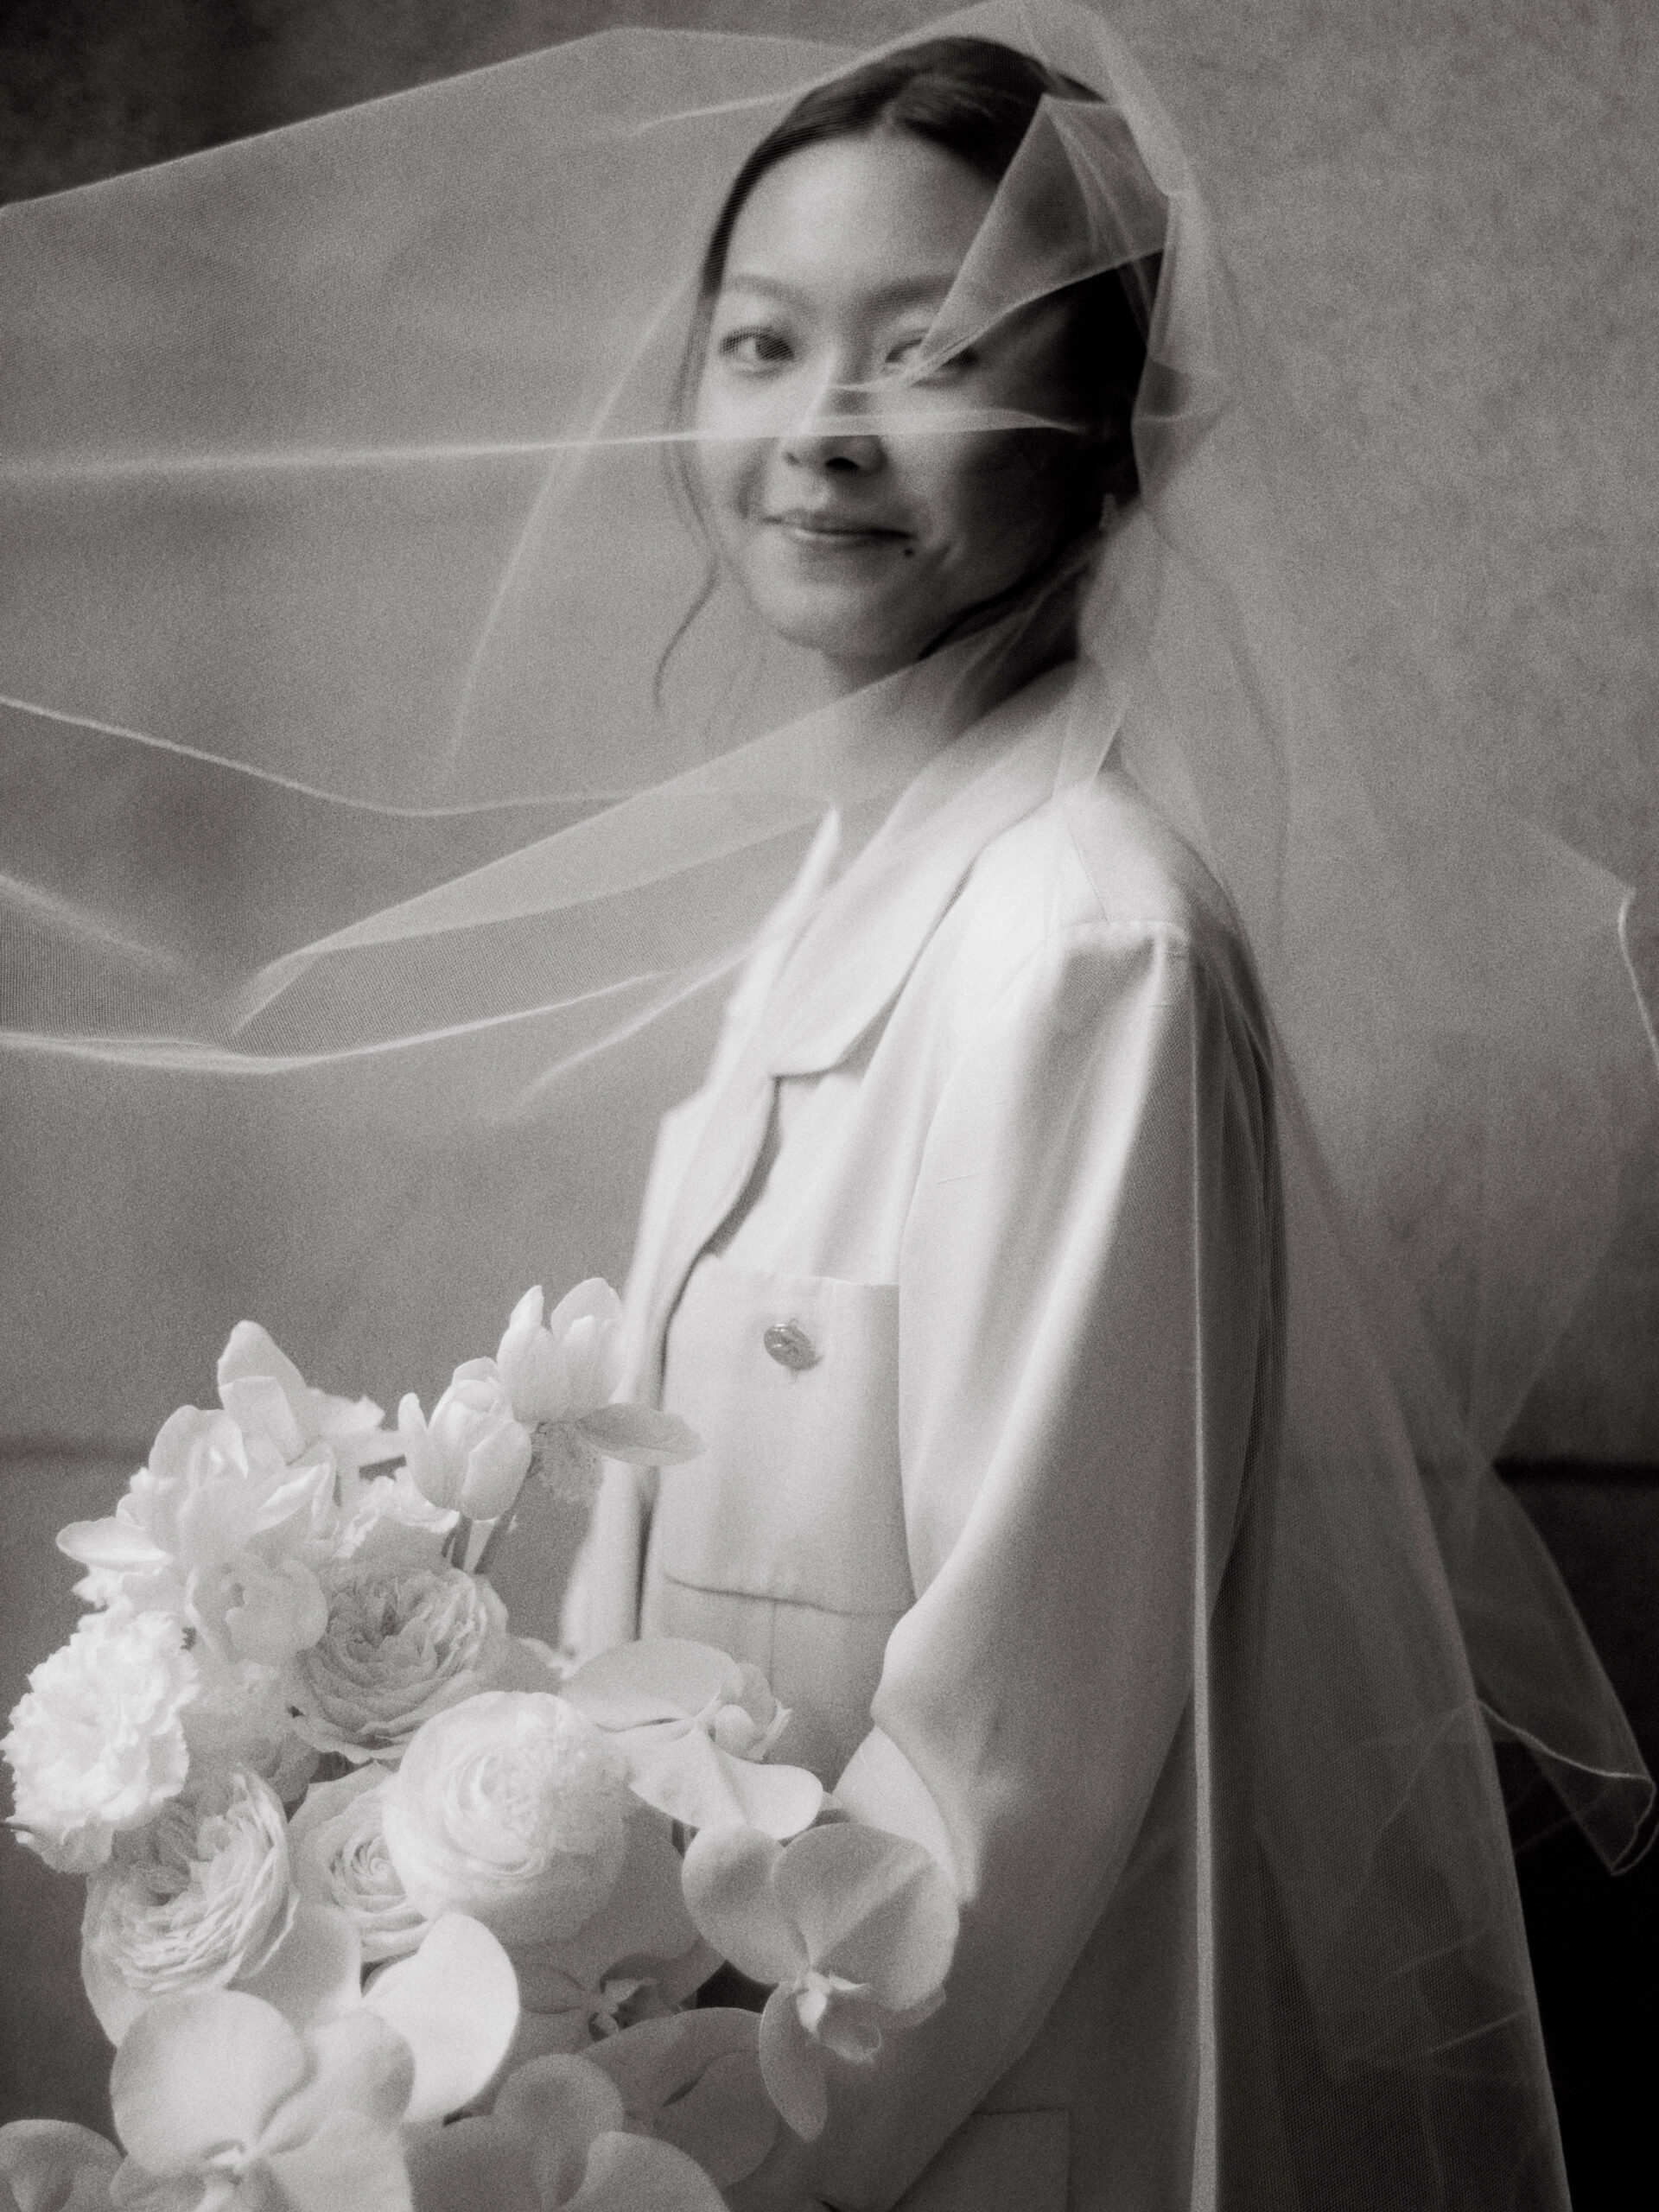 Editorial photo of the bride holding her white monochrome flower bouquet. Image by Jenny Fu Studio